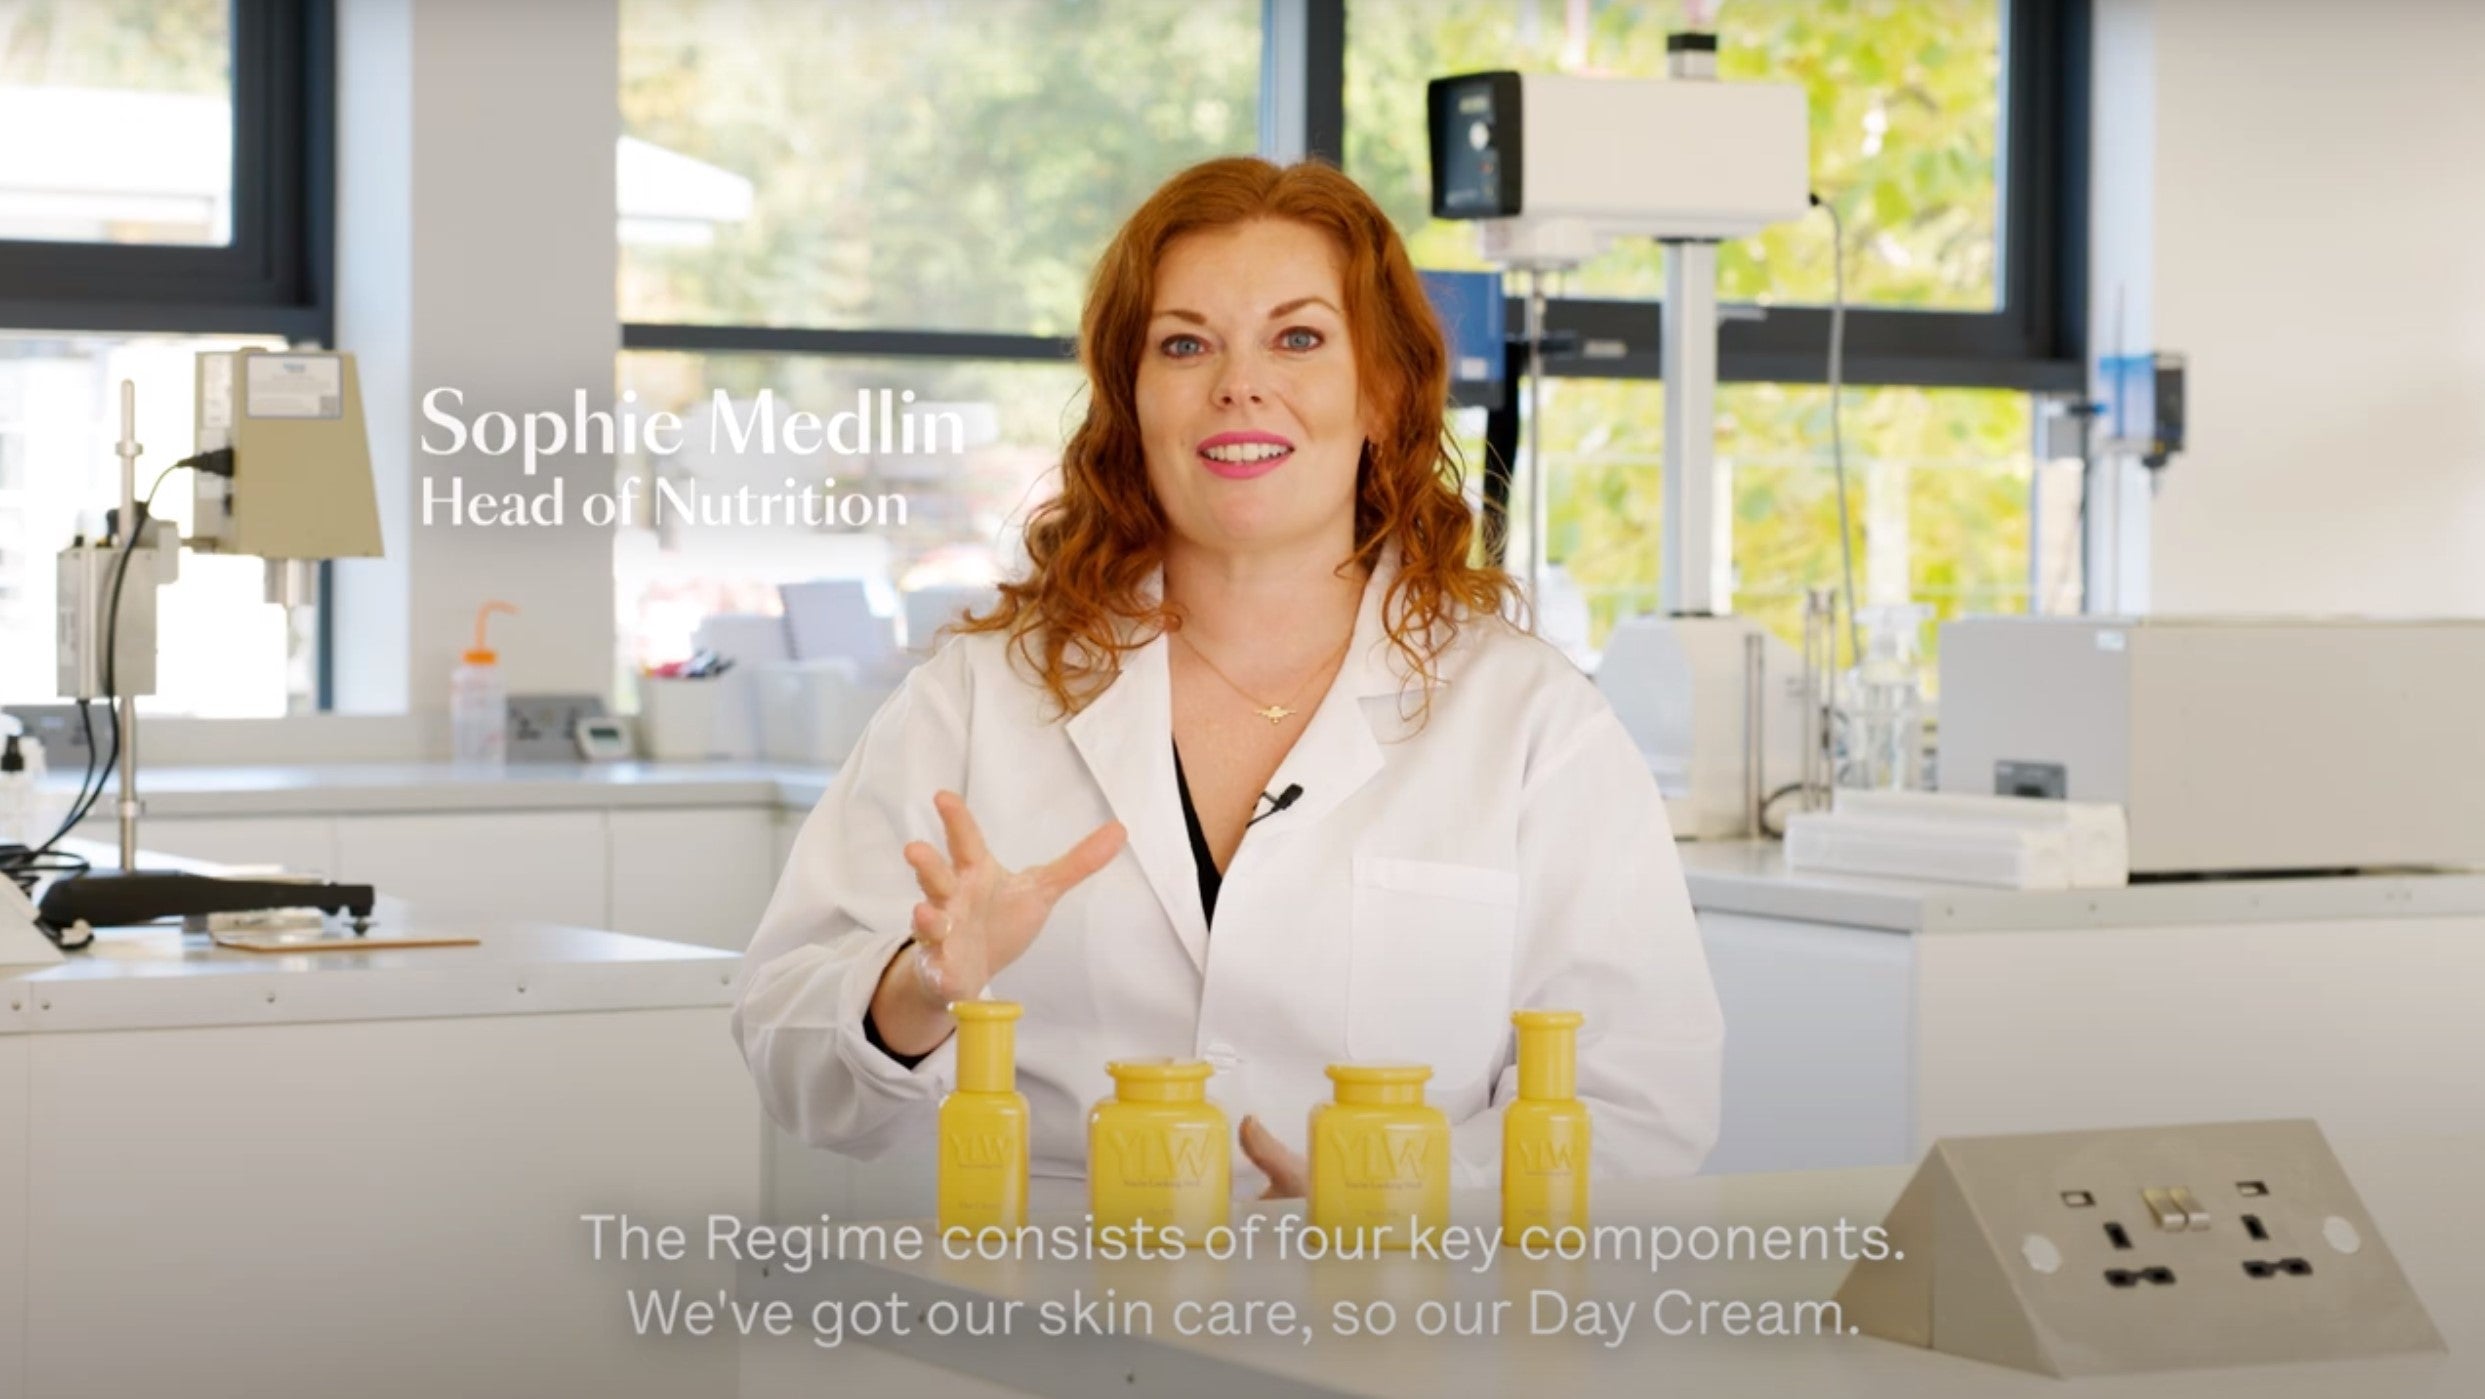 Load video: The Regime product development process with Sophie Medlin